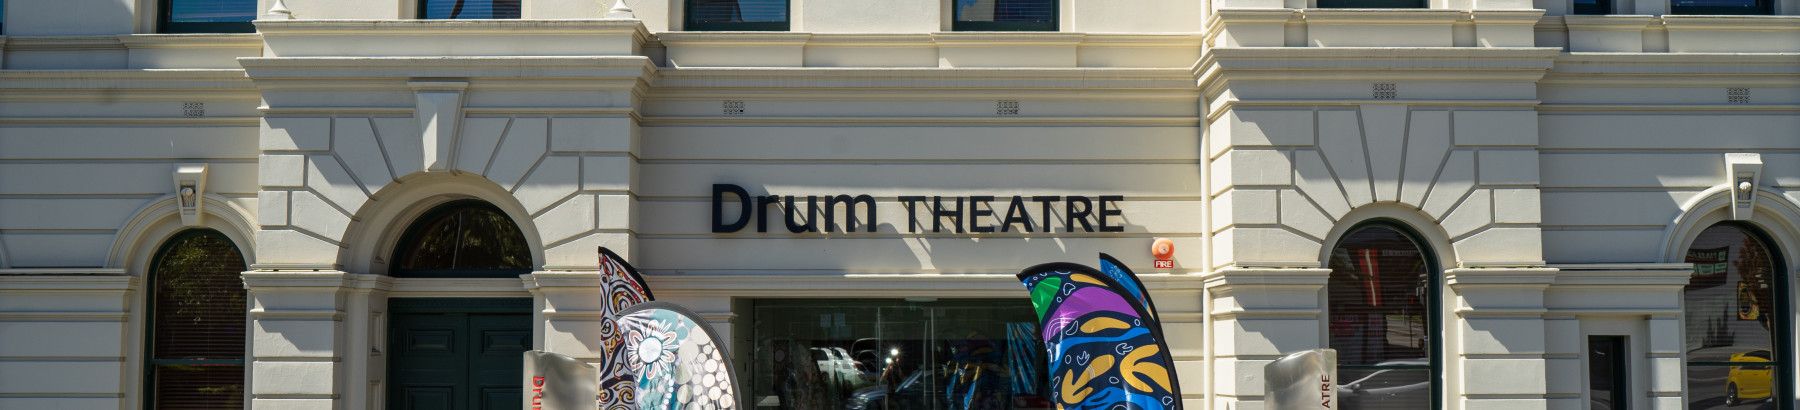 View of the facade of The Drum theatre with plants and flags.